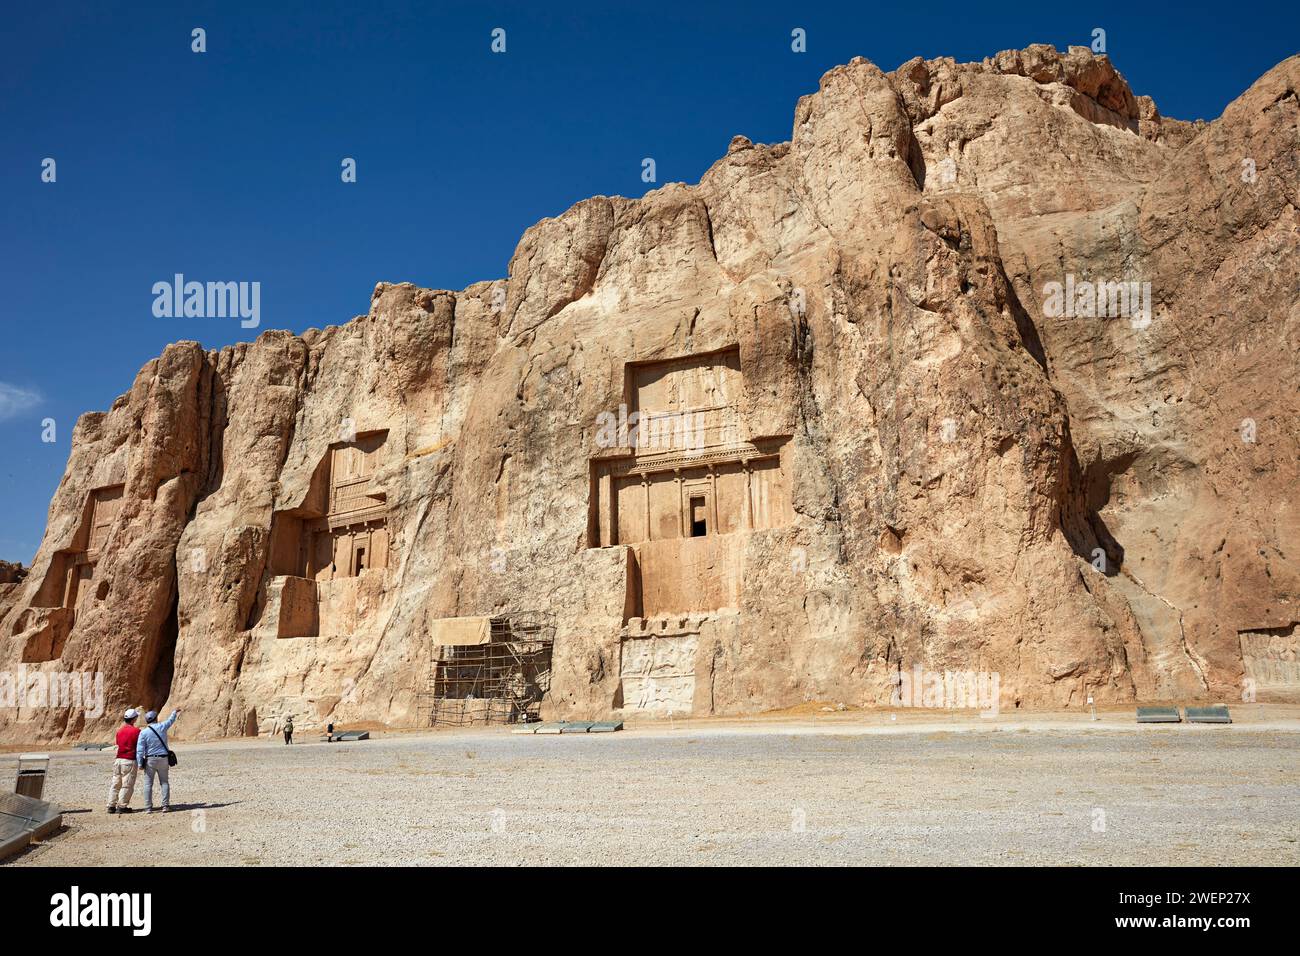 Tourists look at the rock-cut tombs of Persian kings of Achaemenid dynasty in Naqsh-e Rostam Necropolis near Persepolis, Iran. Stock Photo